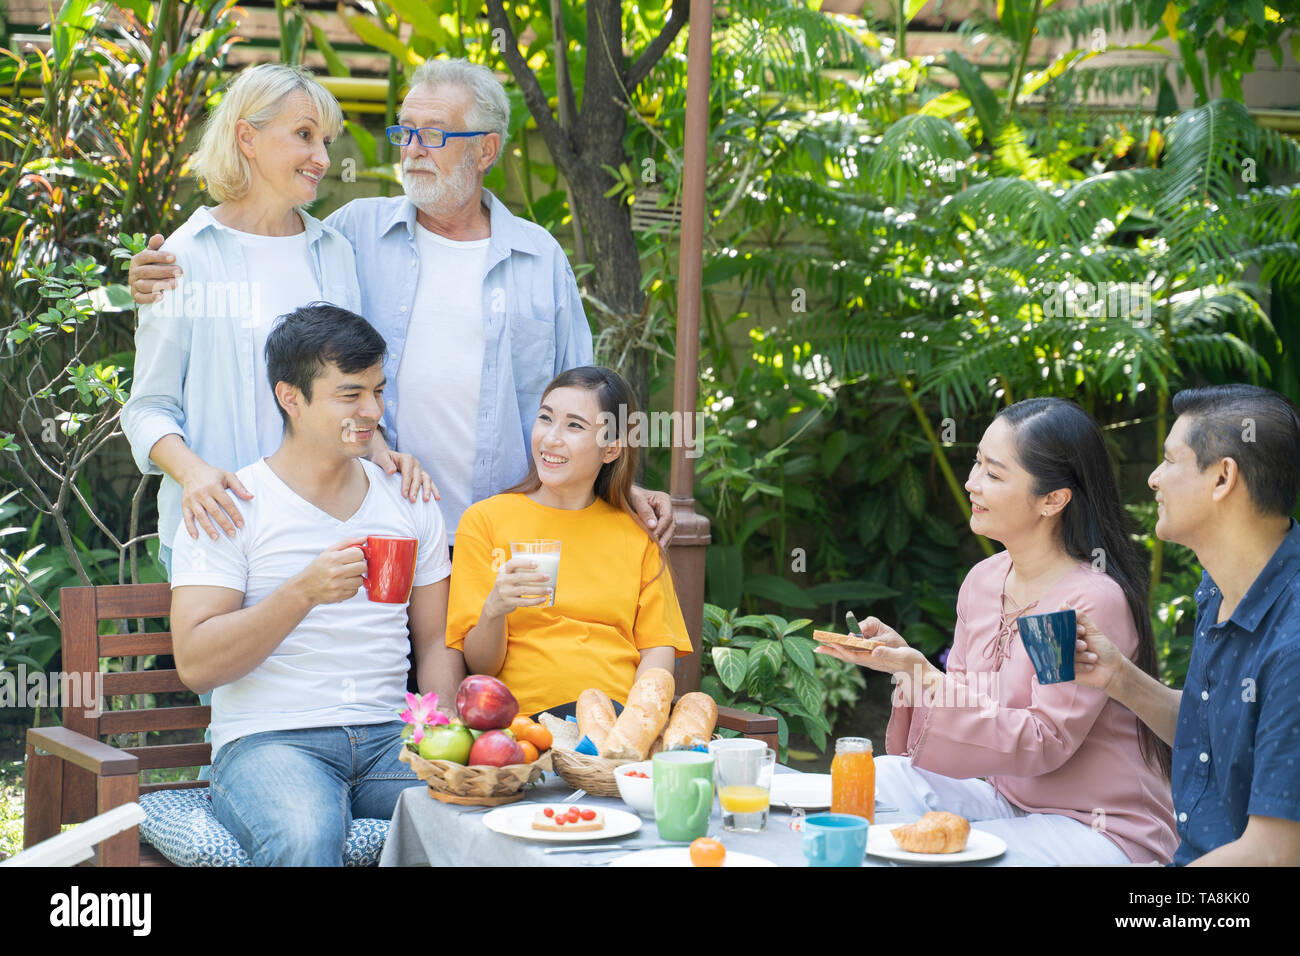 The happiness of two ethnic families - Image Stock Photo